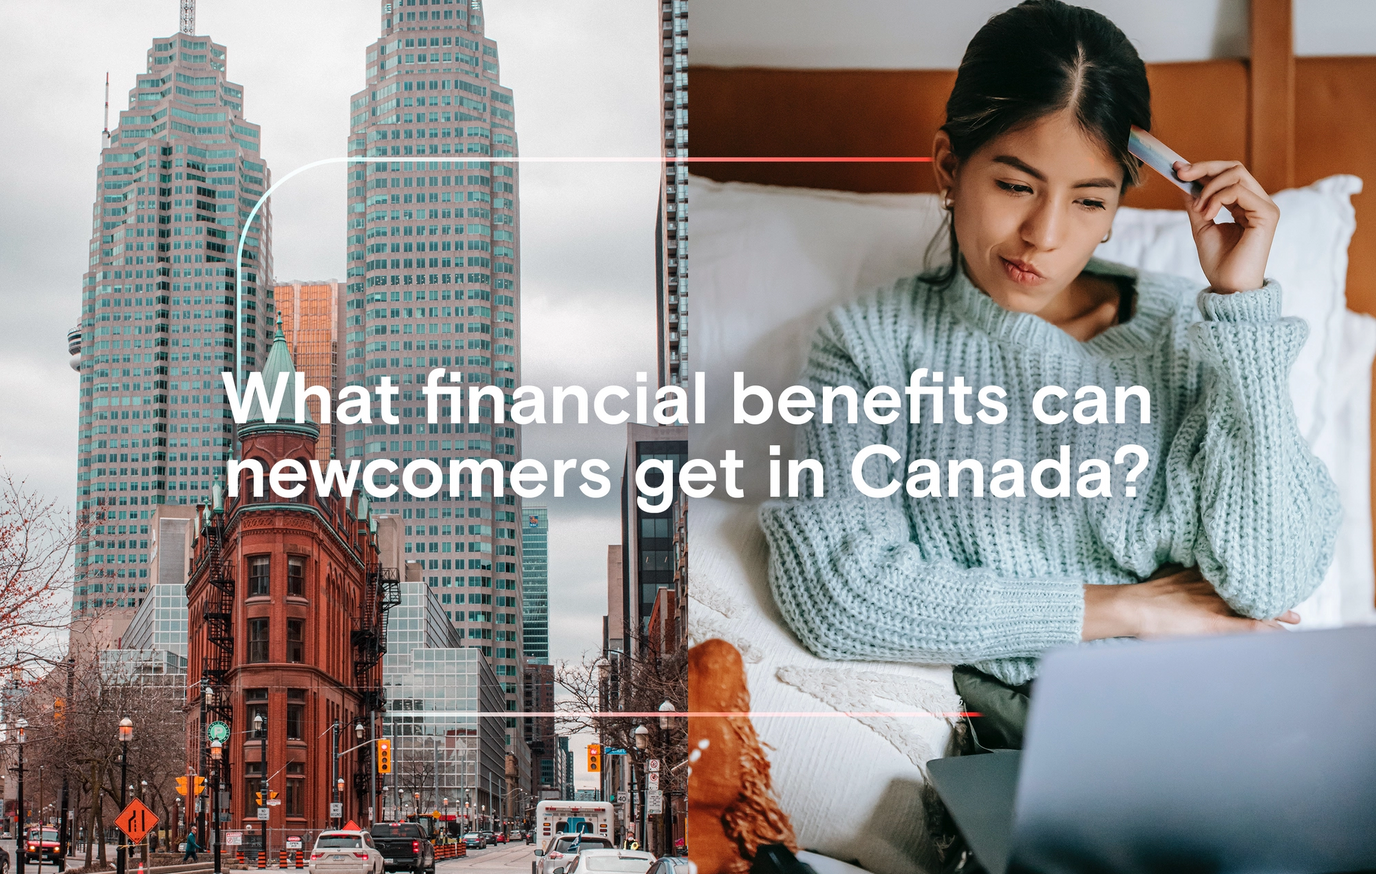 What financial benefits can new immigrants get in Canada?